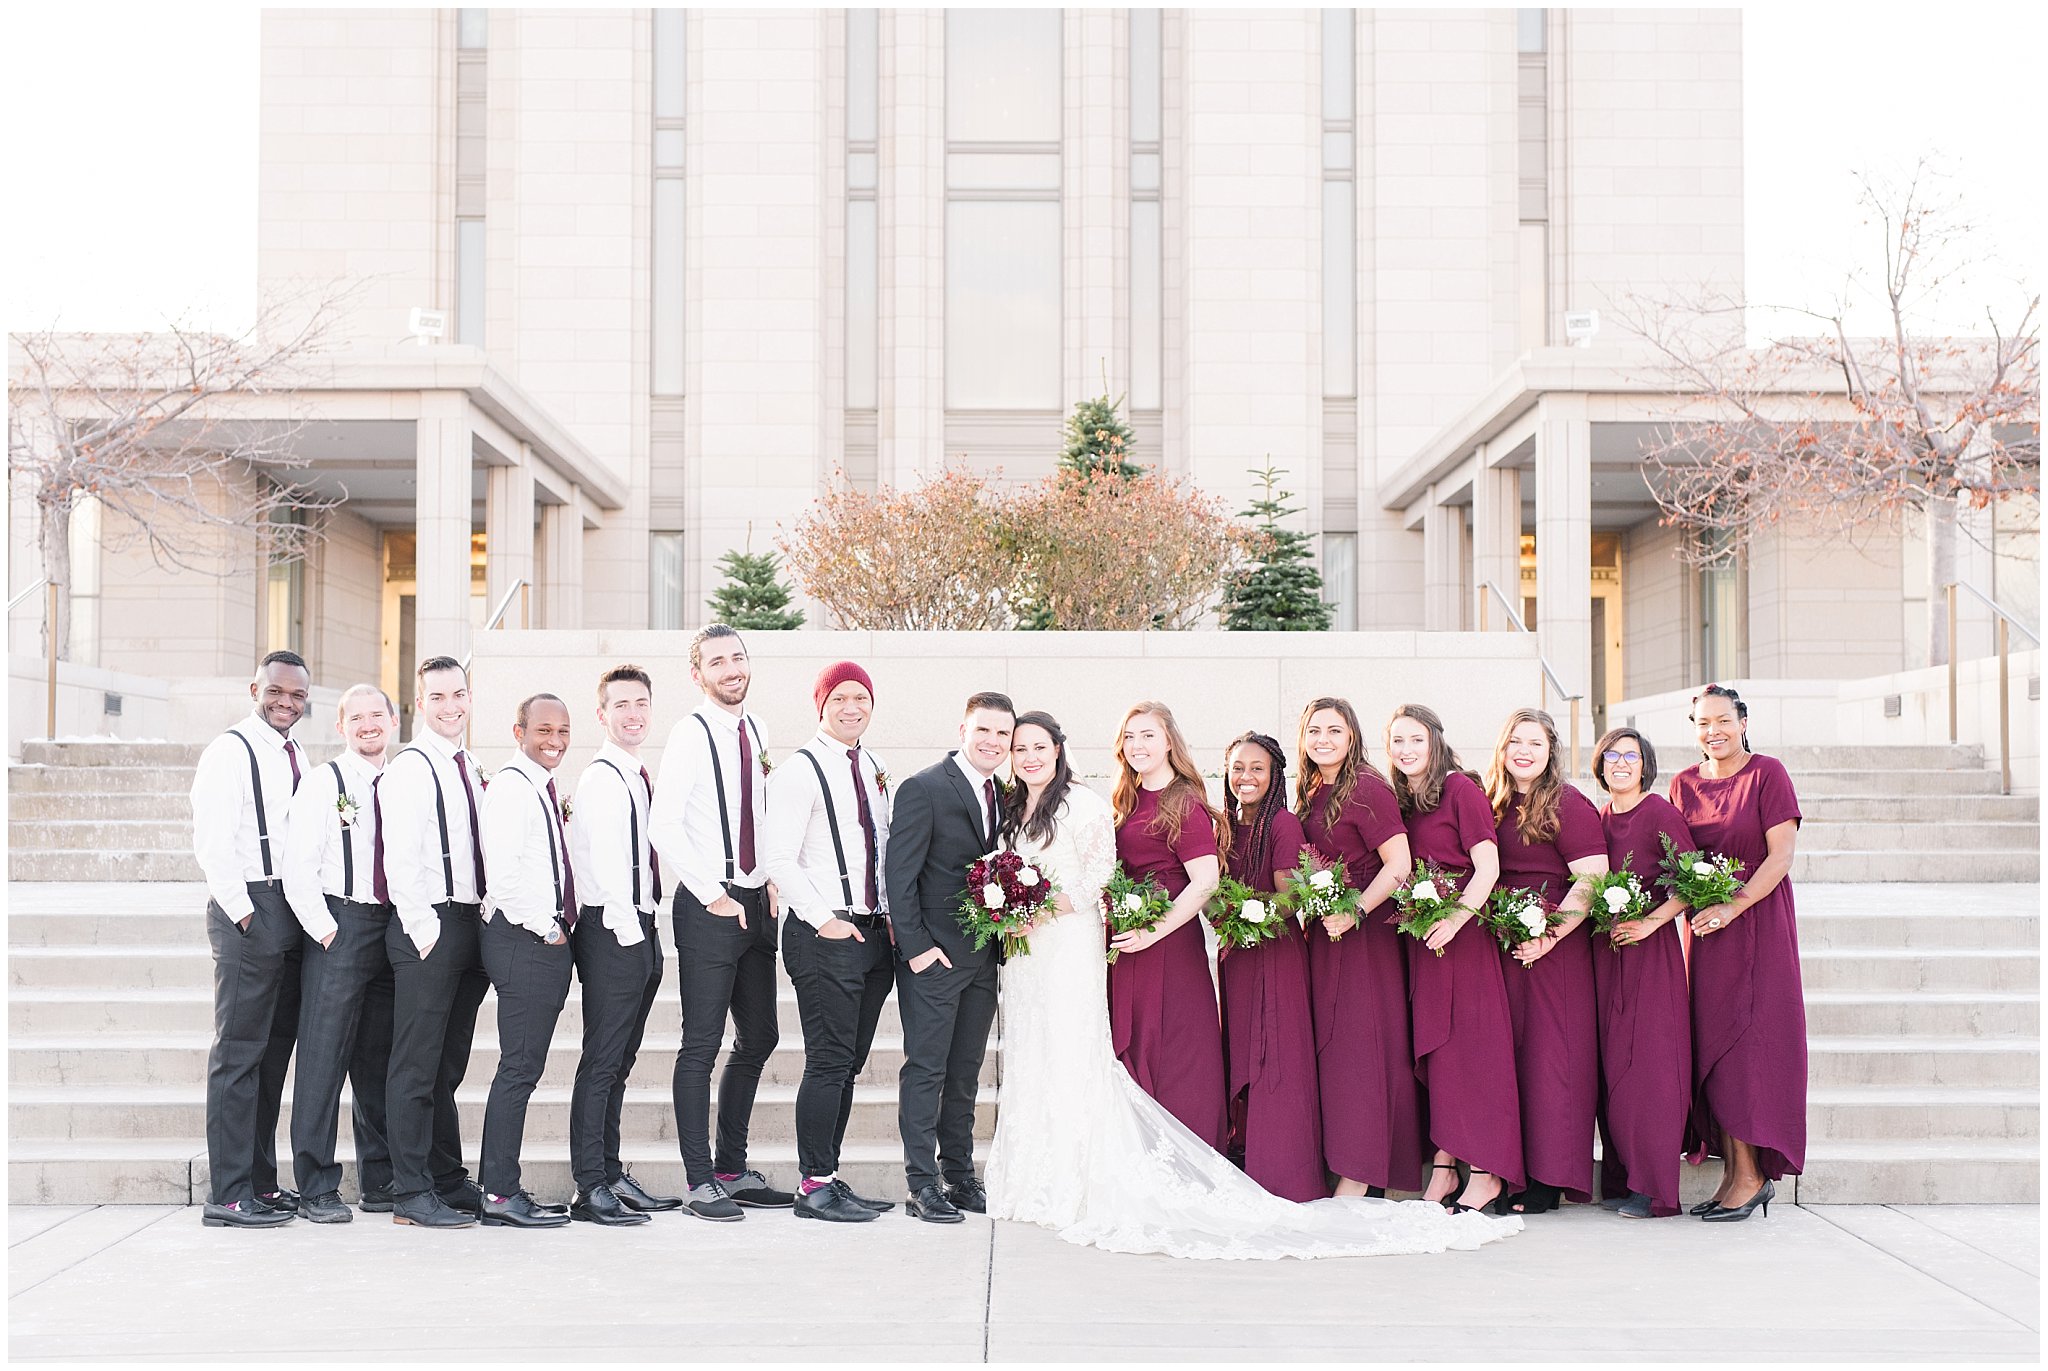 Bridal party portraits in burgundy and black at the Oquirrh Mountain Temple | Oquirrh Mountain Temple and Gardner Village Wedding | The Gathering Place | Jessie and Dallin Photography